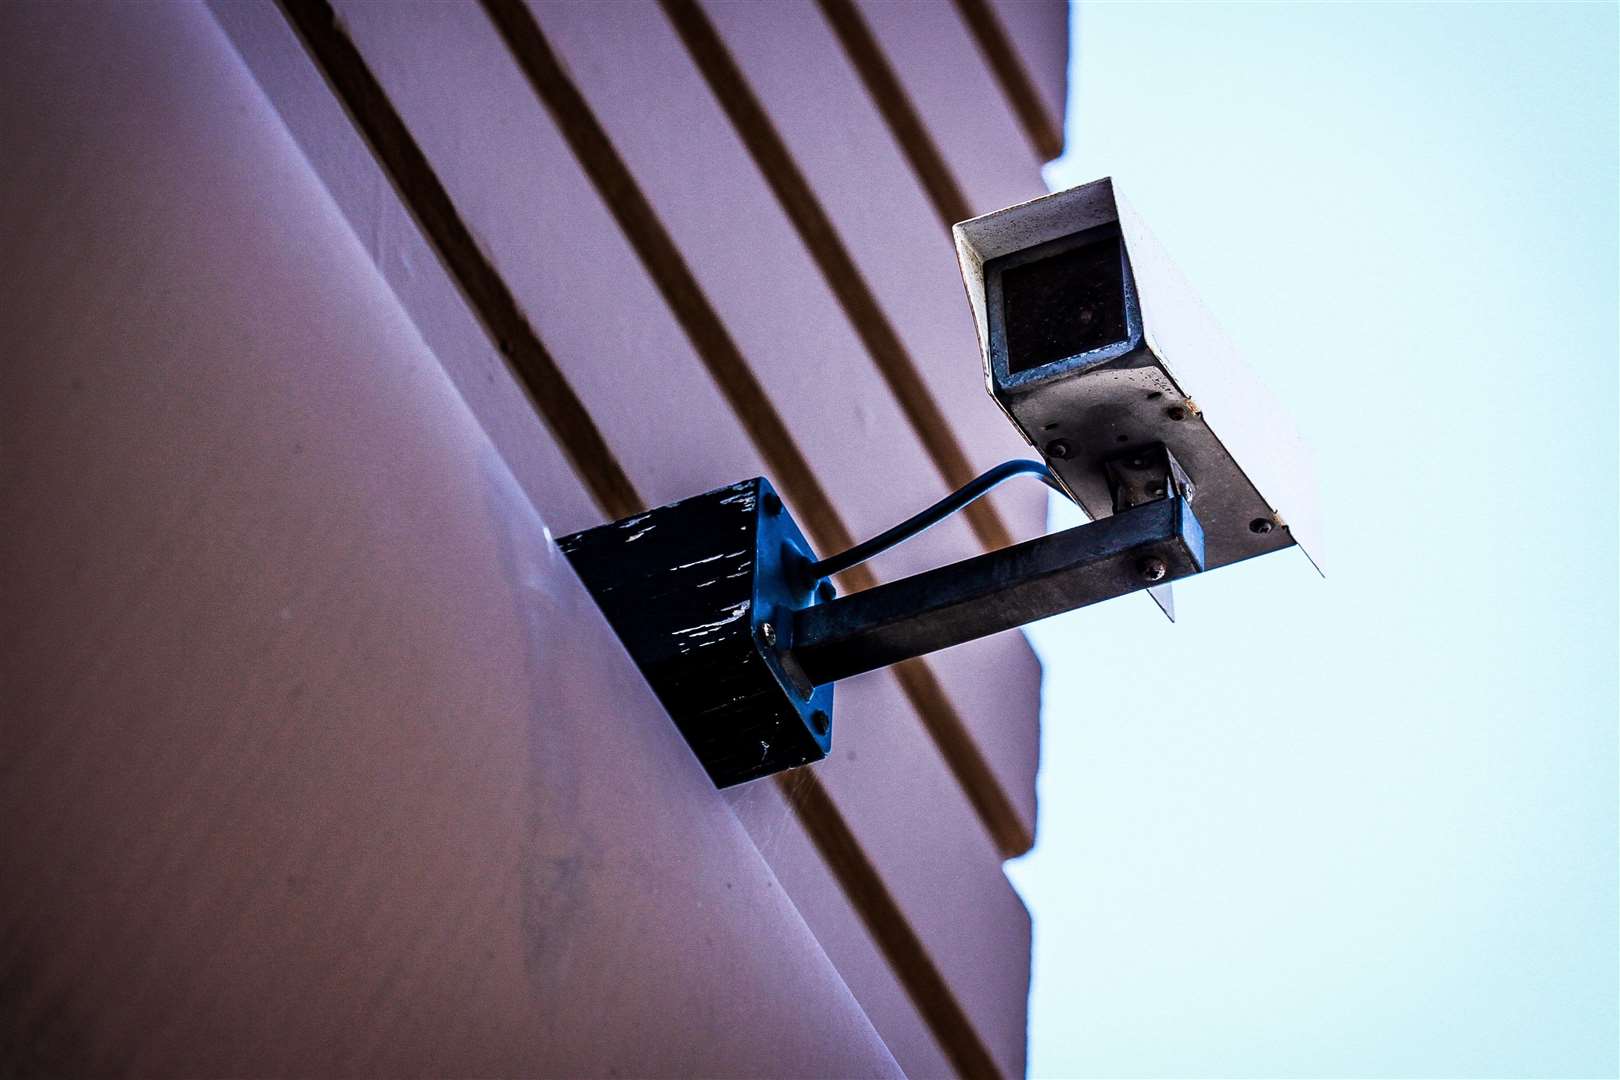 The cameras have already been trialled elsewhere in the UK. Stock image: Unsplash